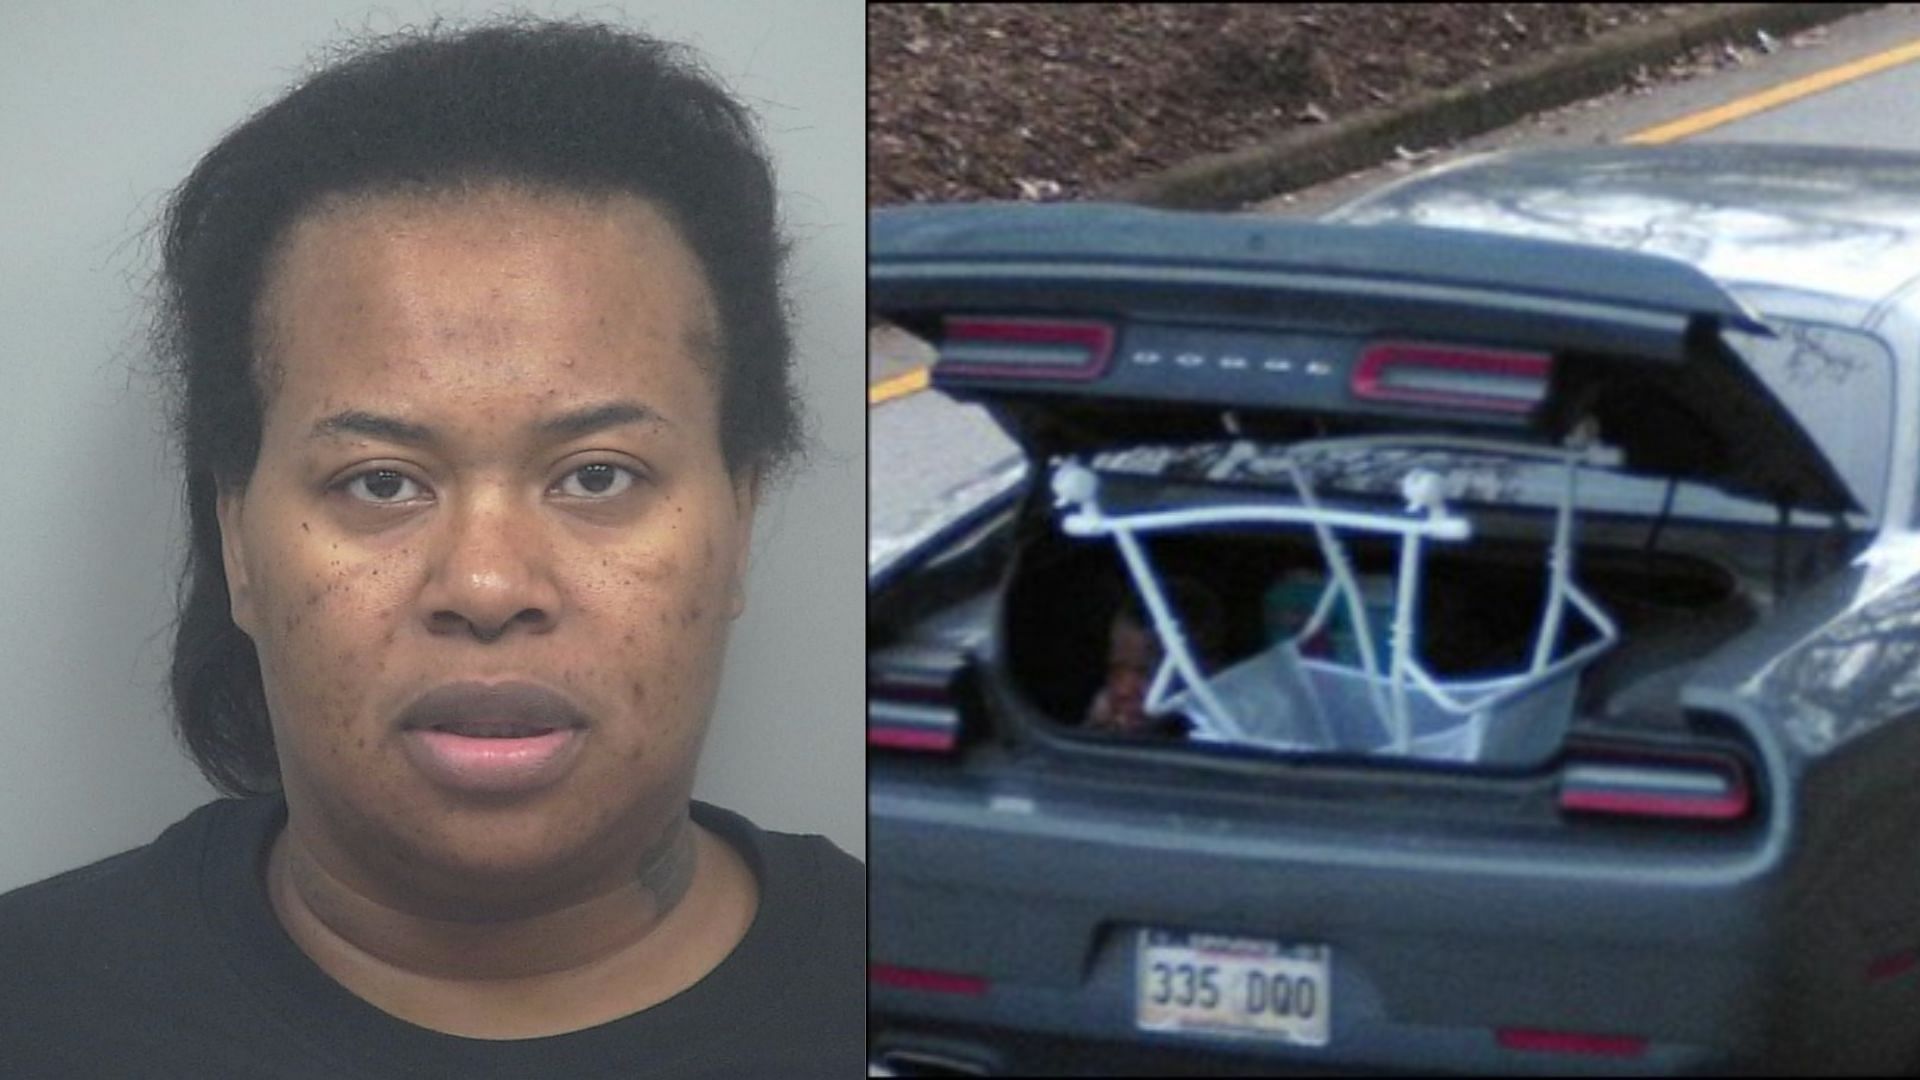 Diana Shaffer and an image that shows a child sitting in the trunk (Image via Gwinnett County Police